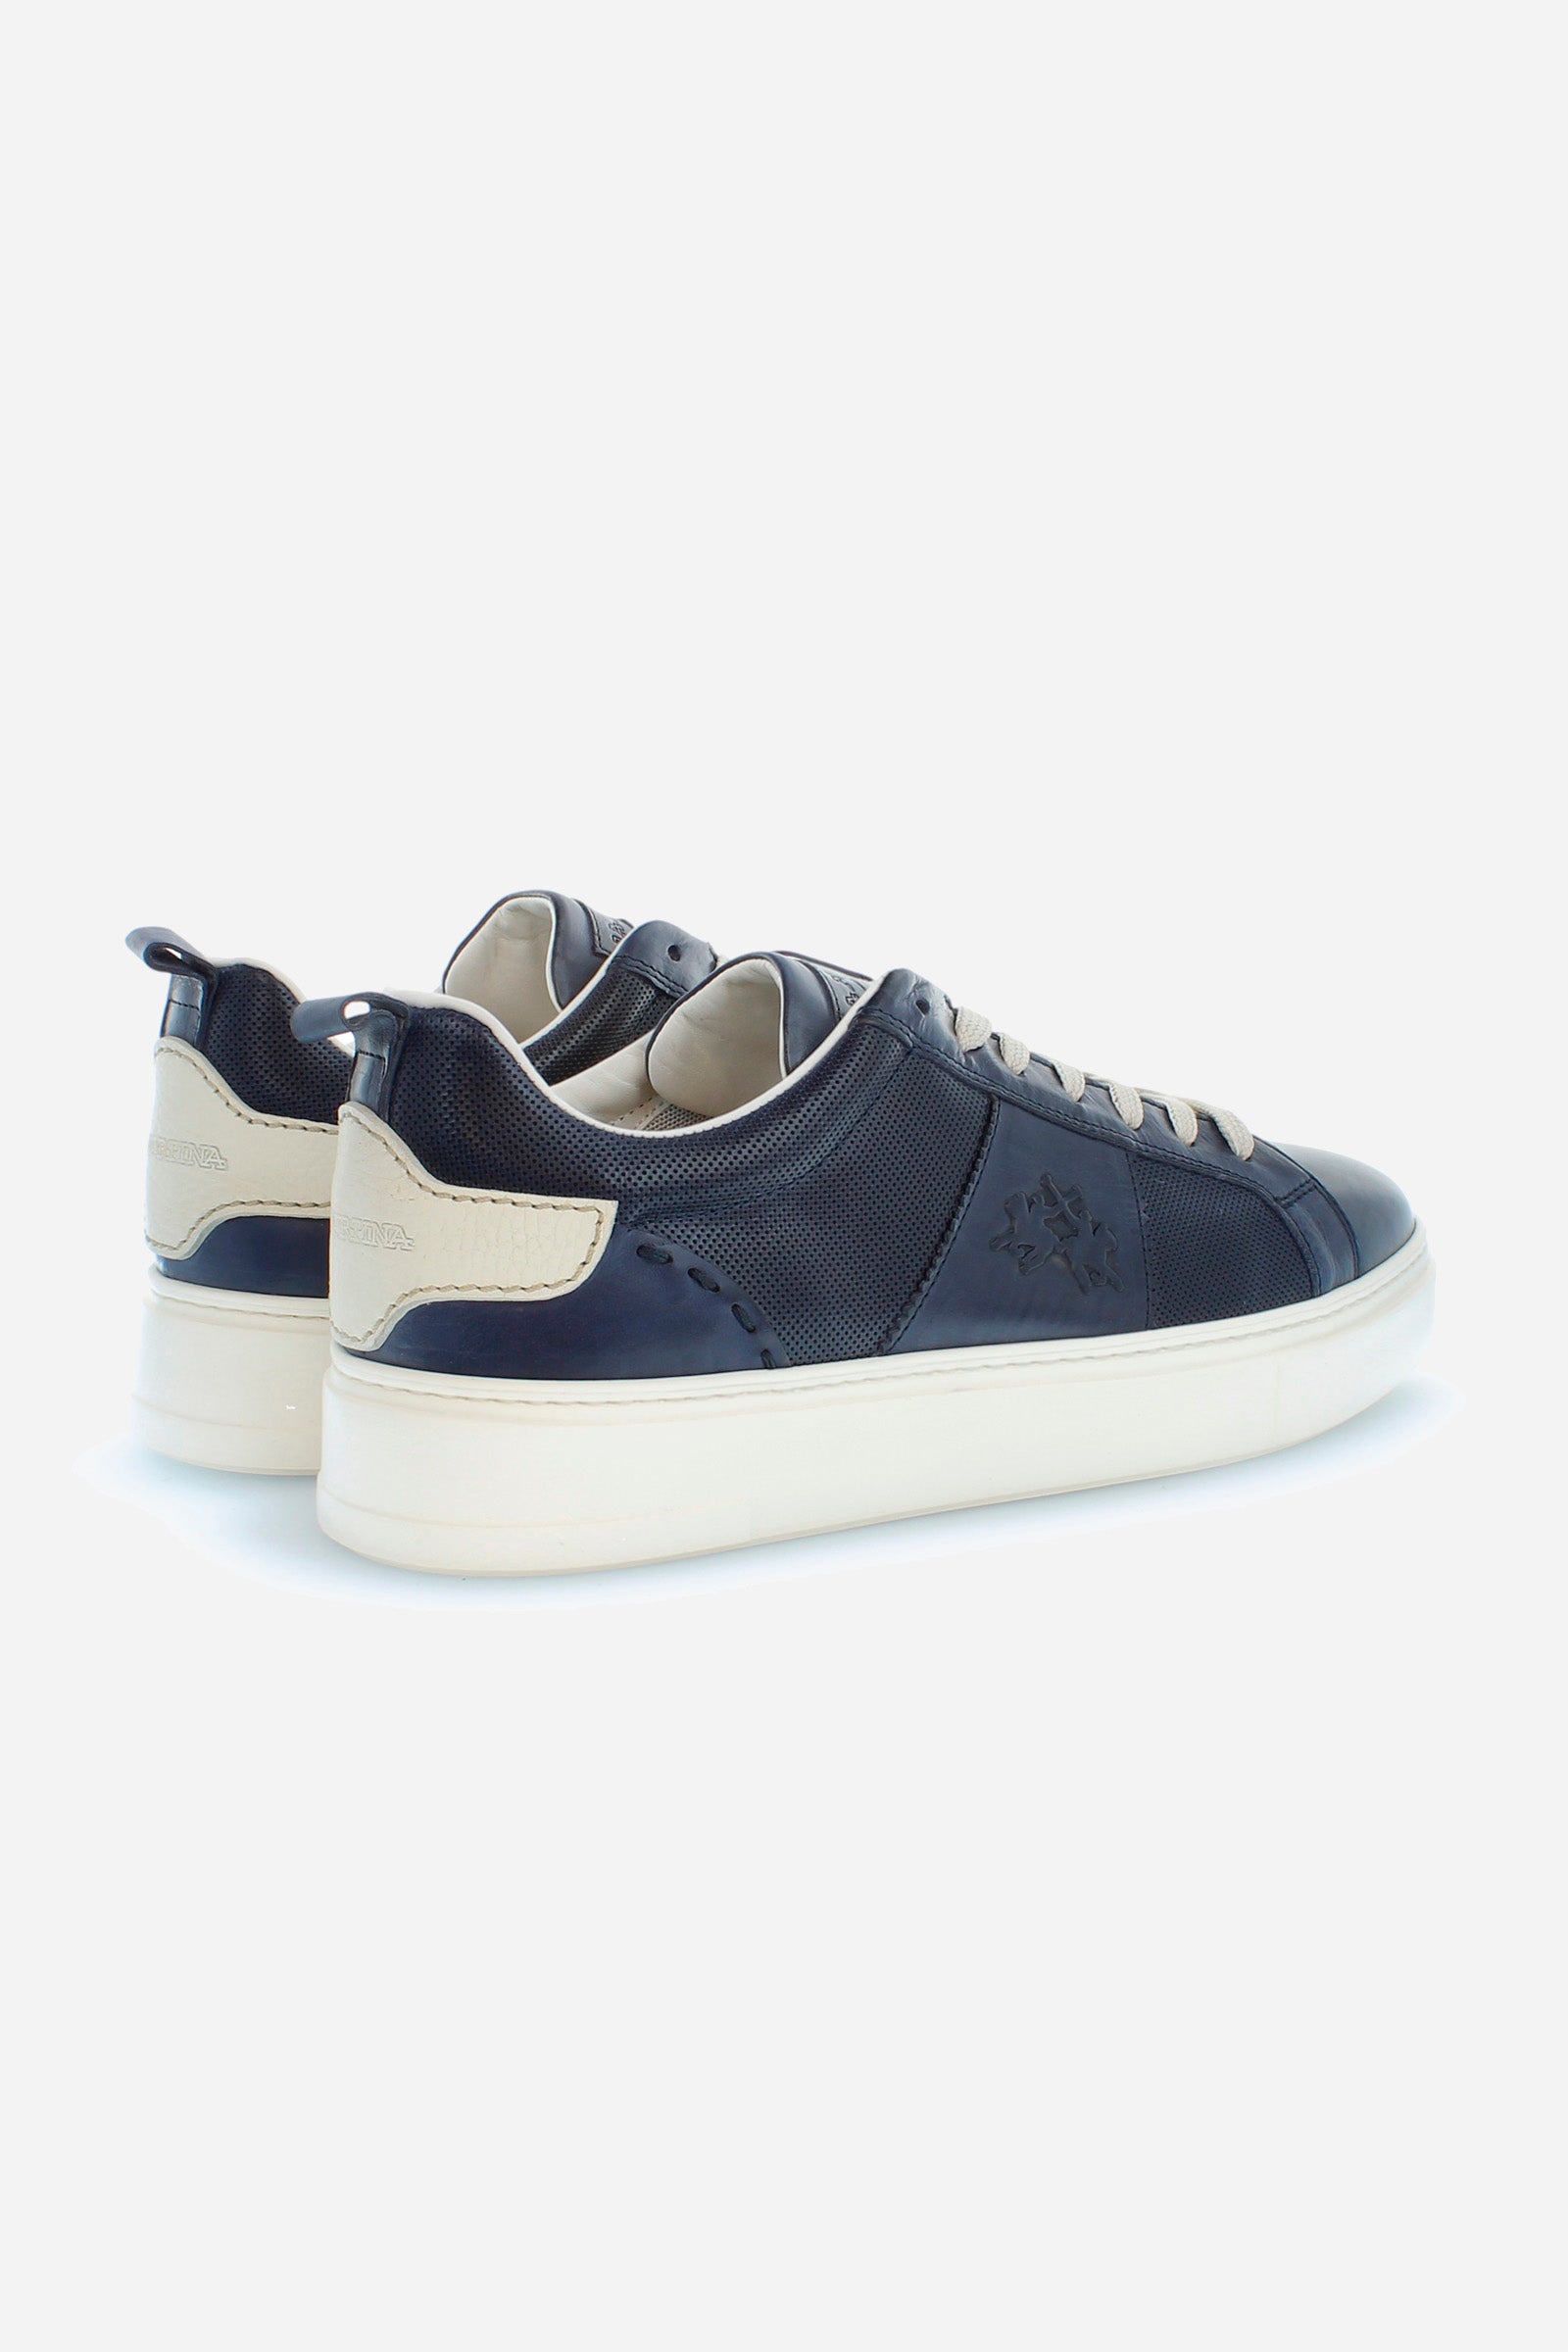 Men's leather trainers with contrasting inserts